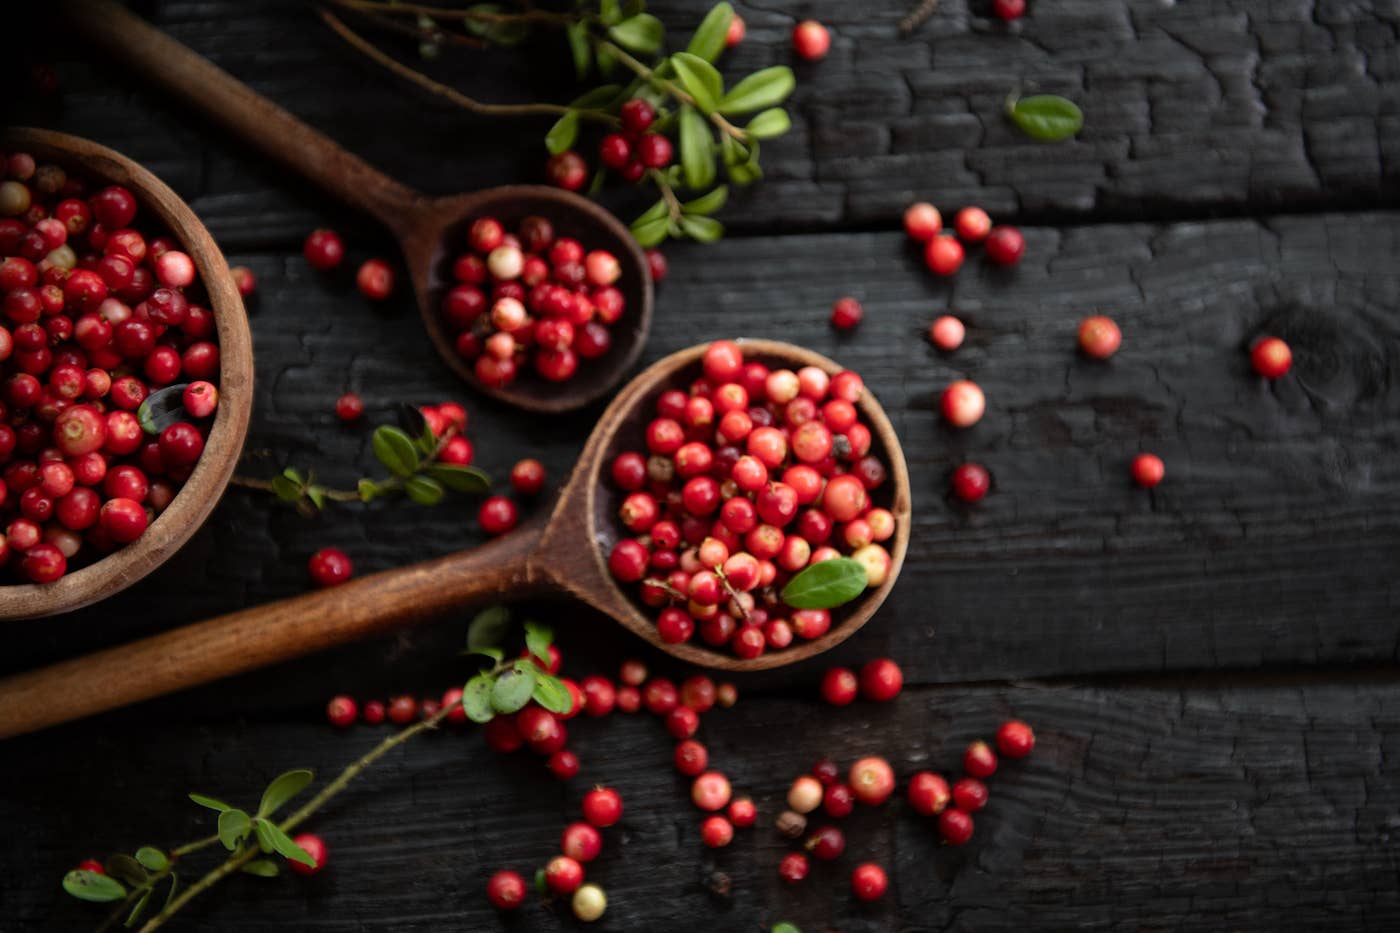 Red cranberries on wooden background, with some in a wooden spoon, and sprigs of their leaves to the side